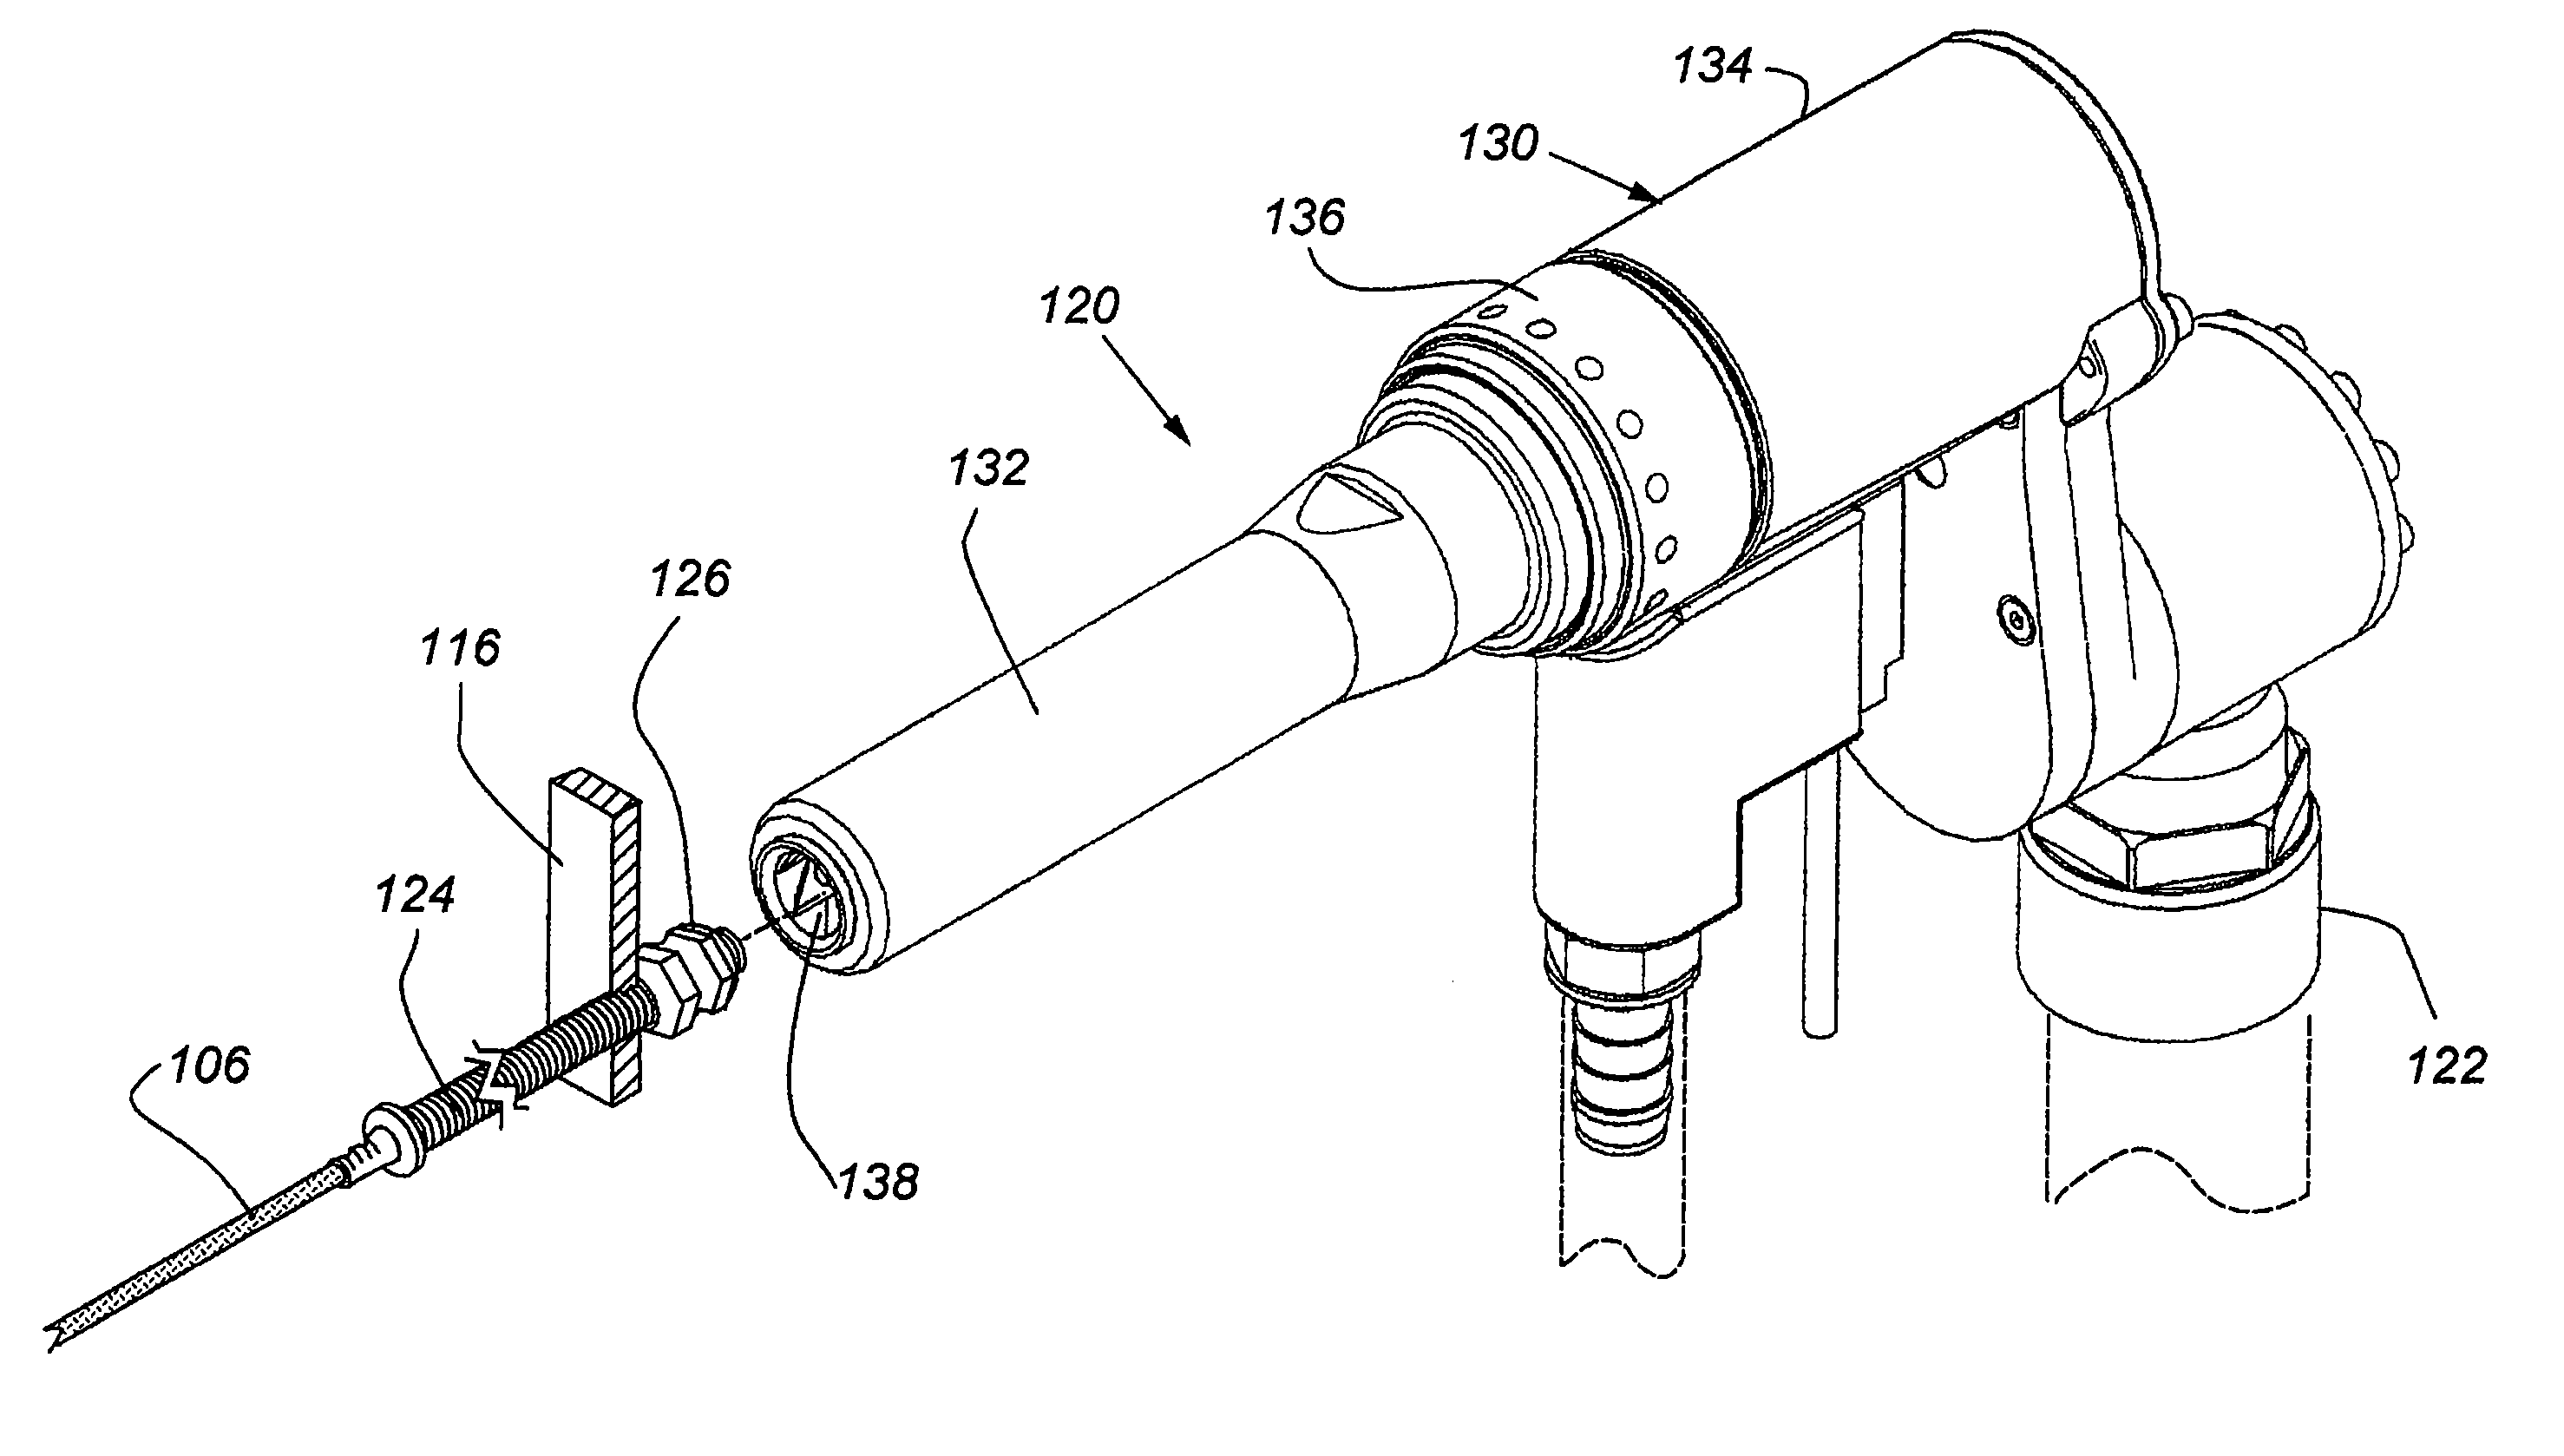 System and Method for Tensioning an Emergency Brake System